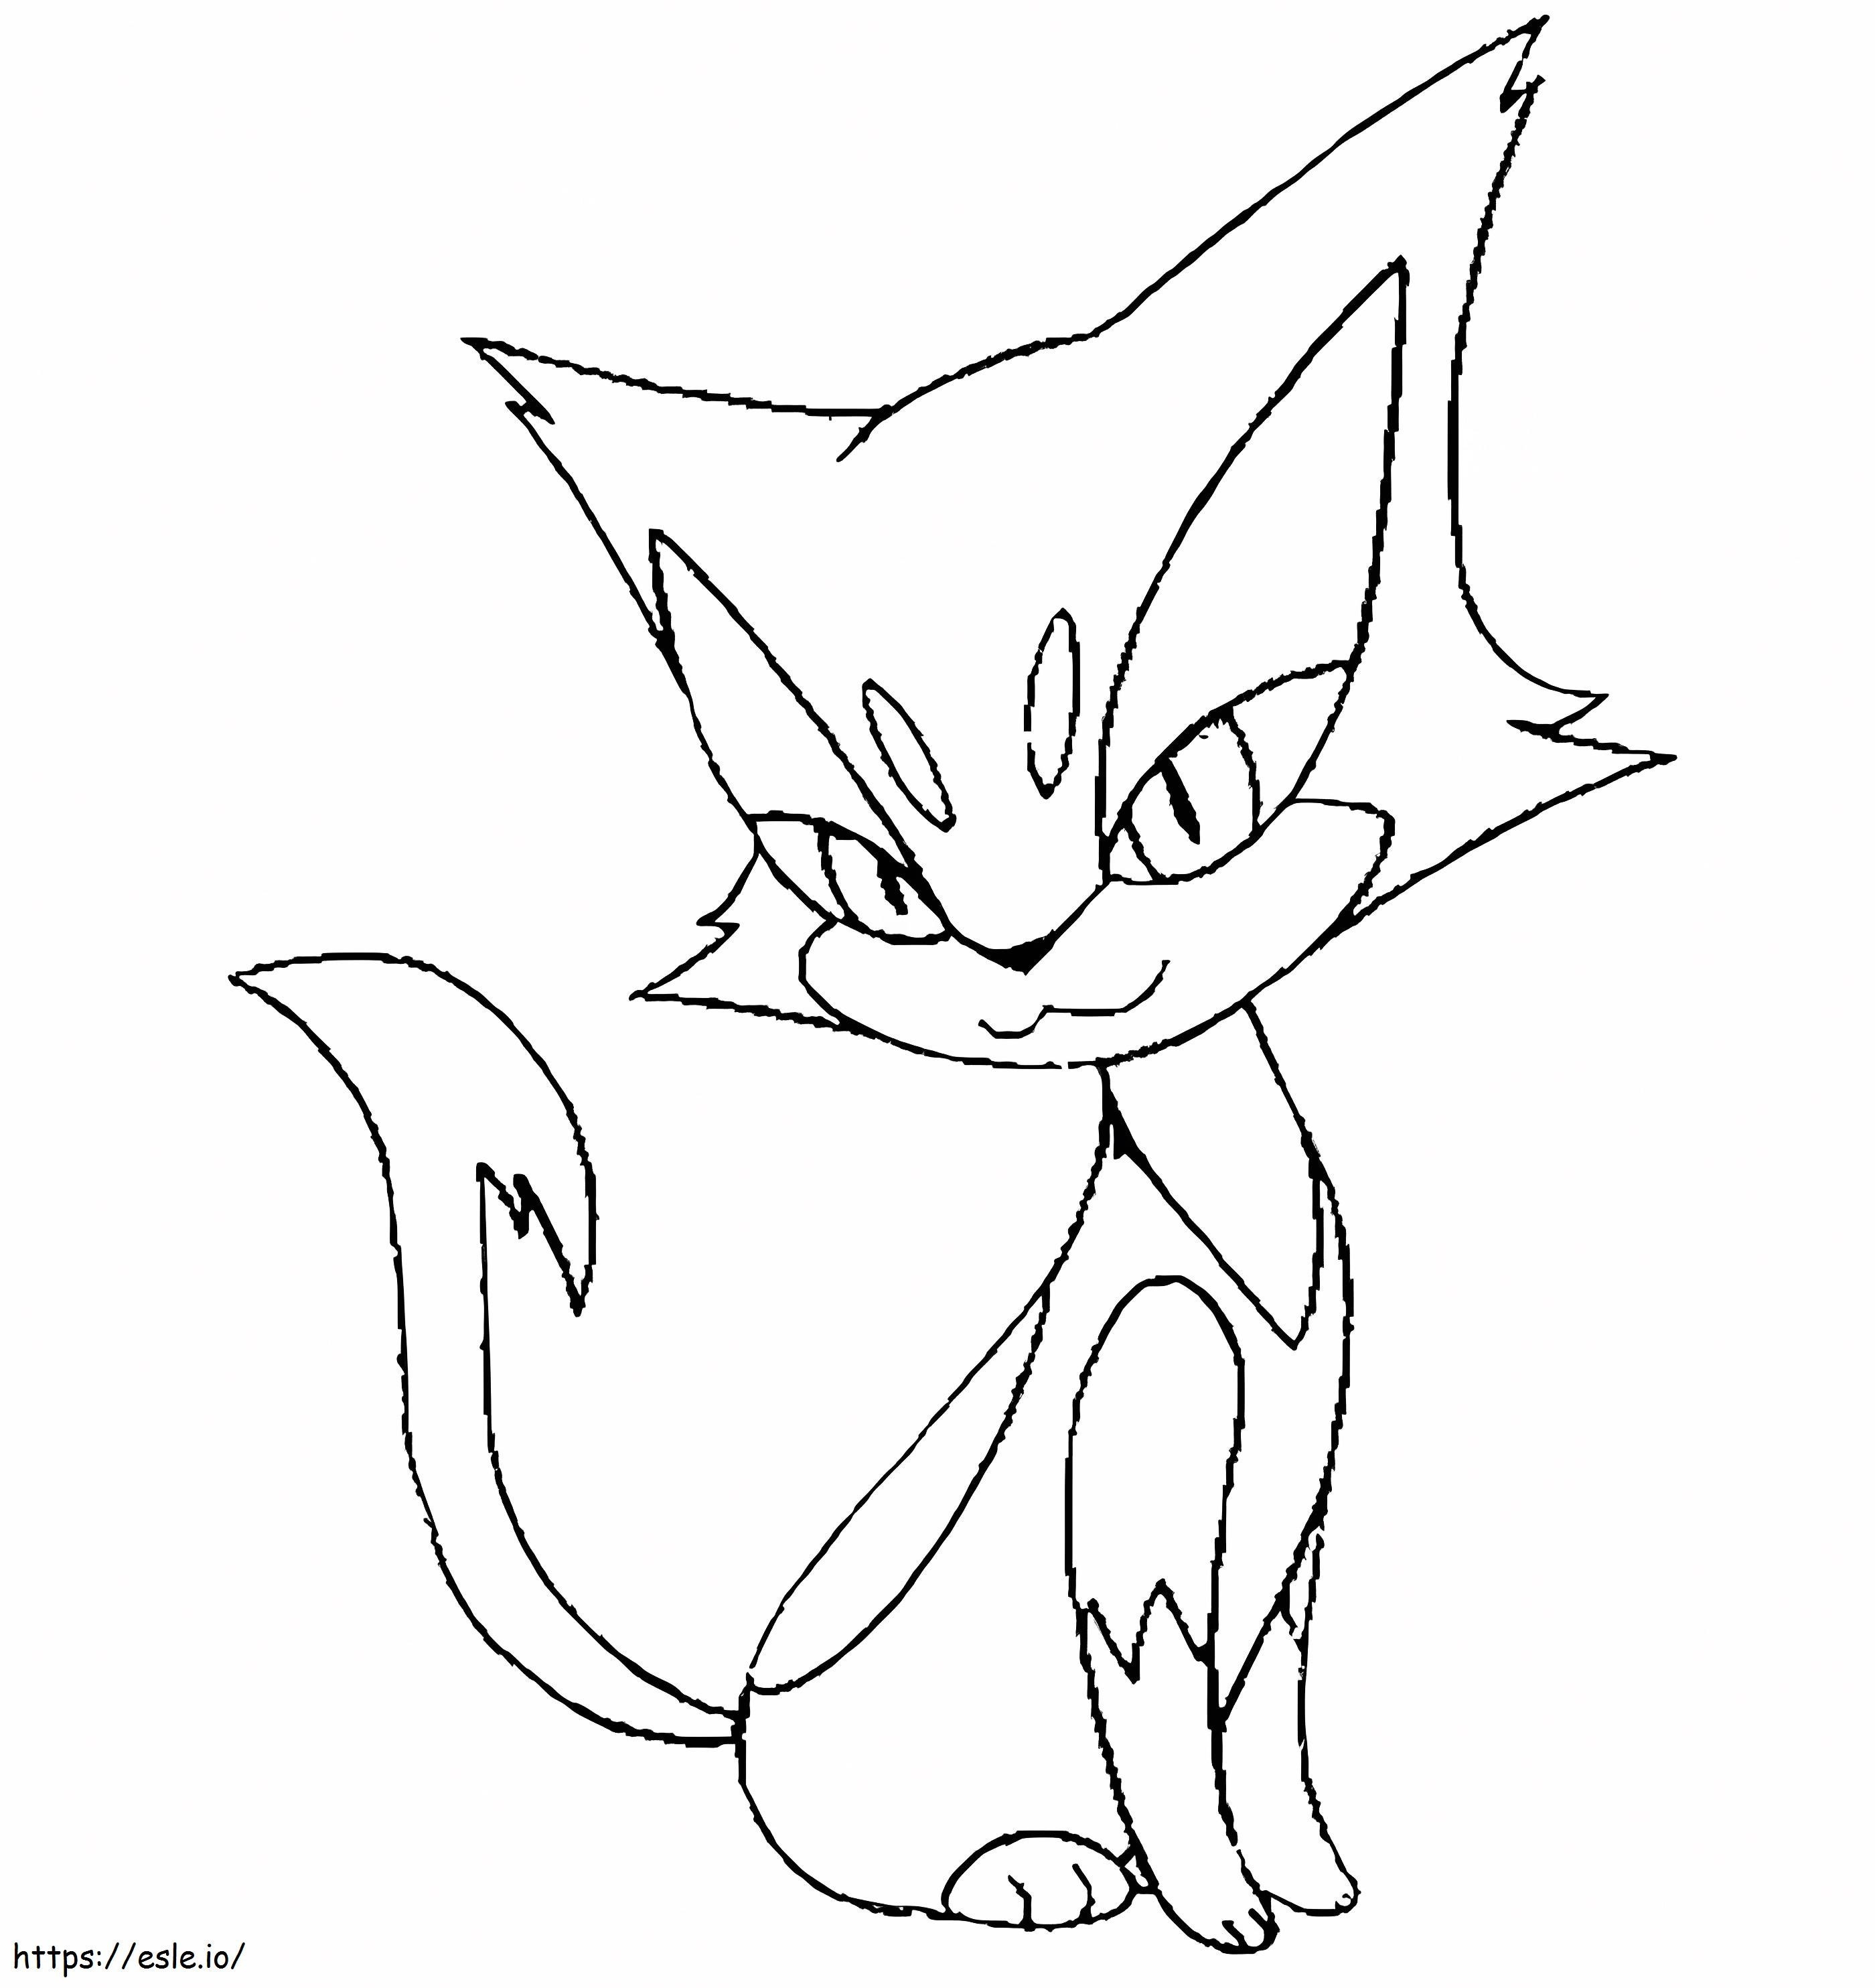 I Purred Pokemon coloring page